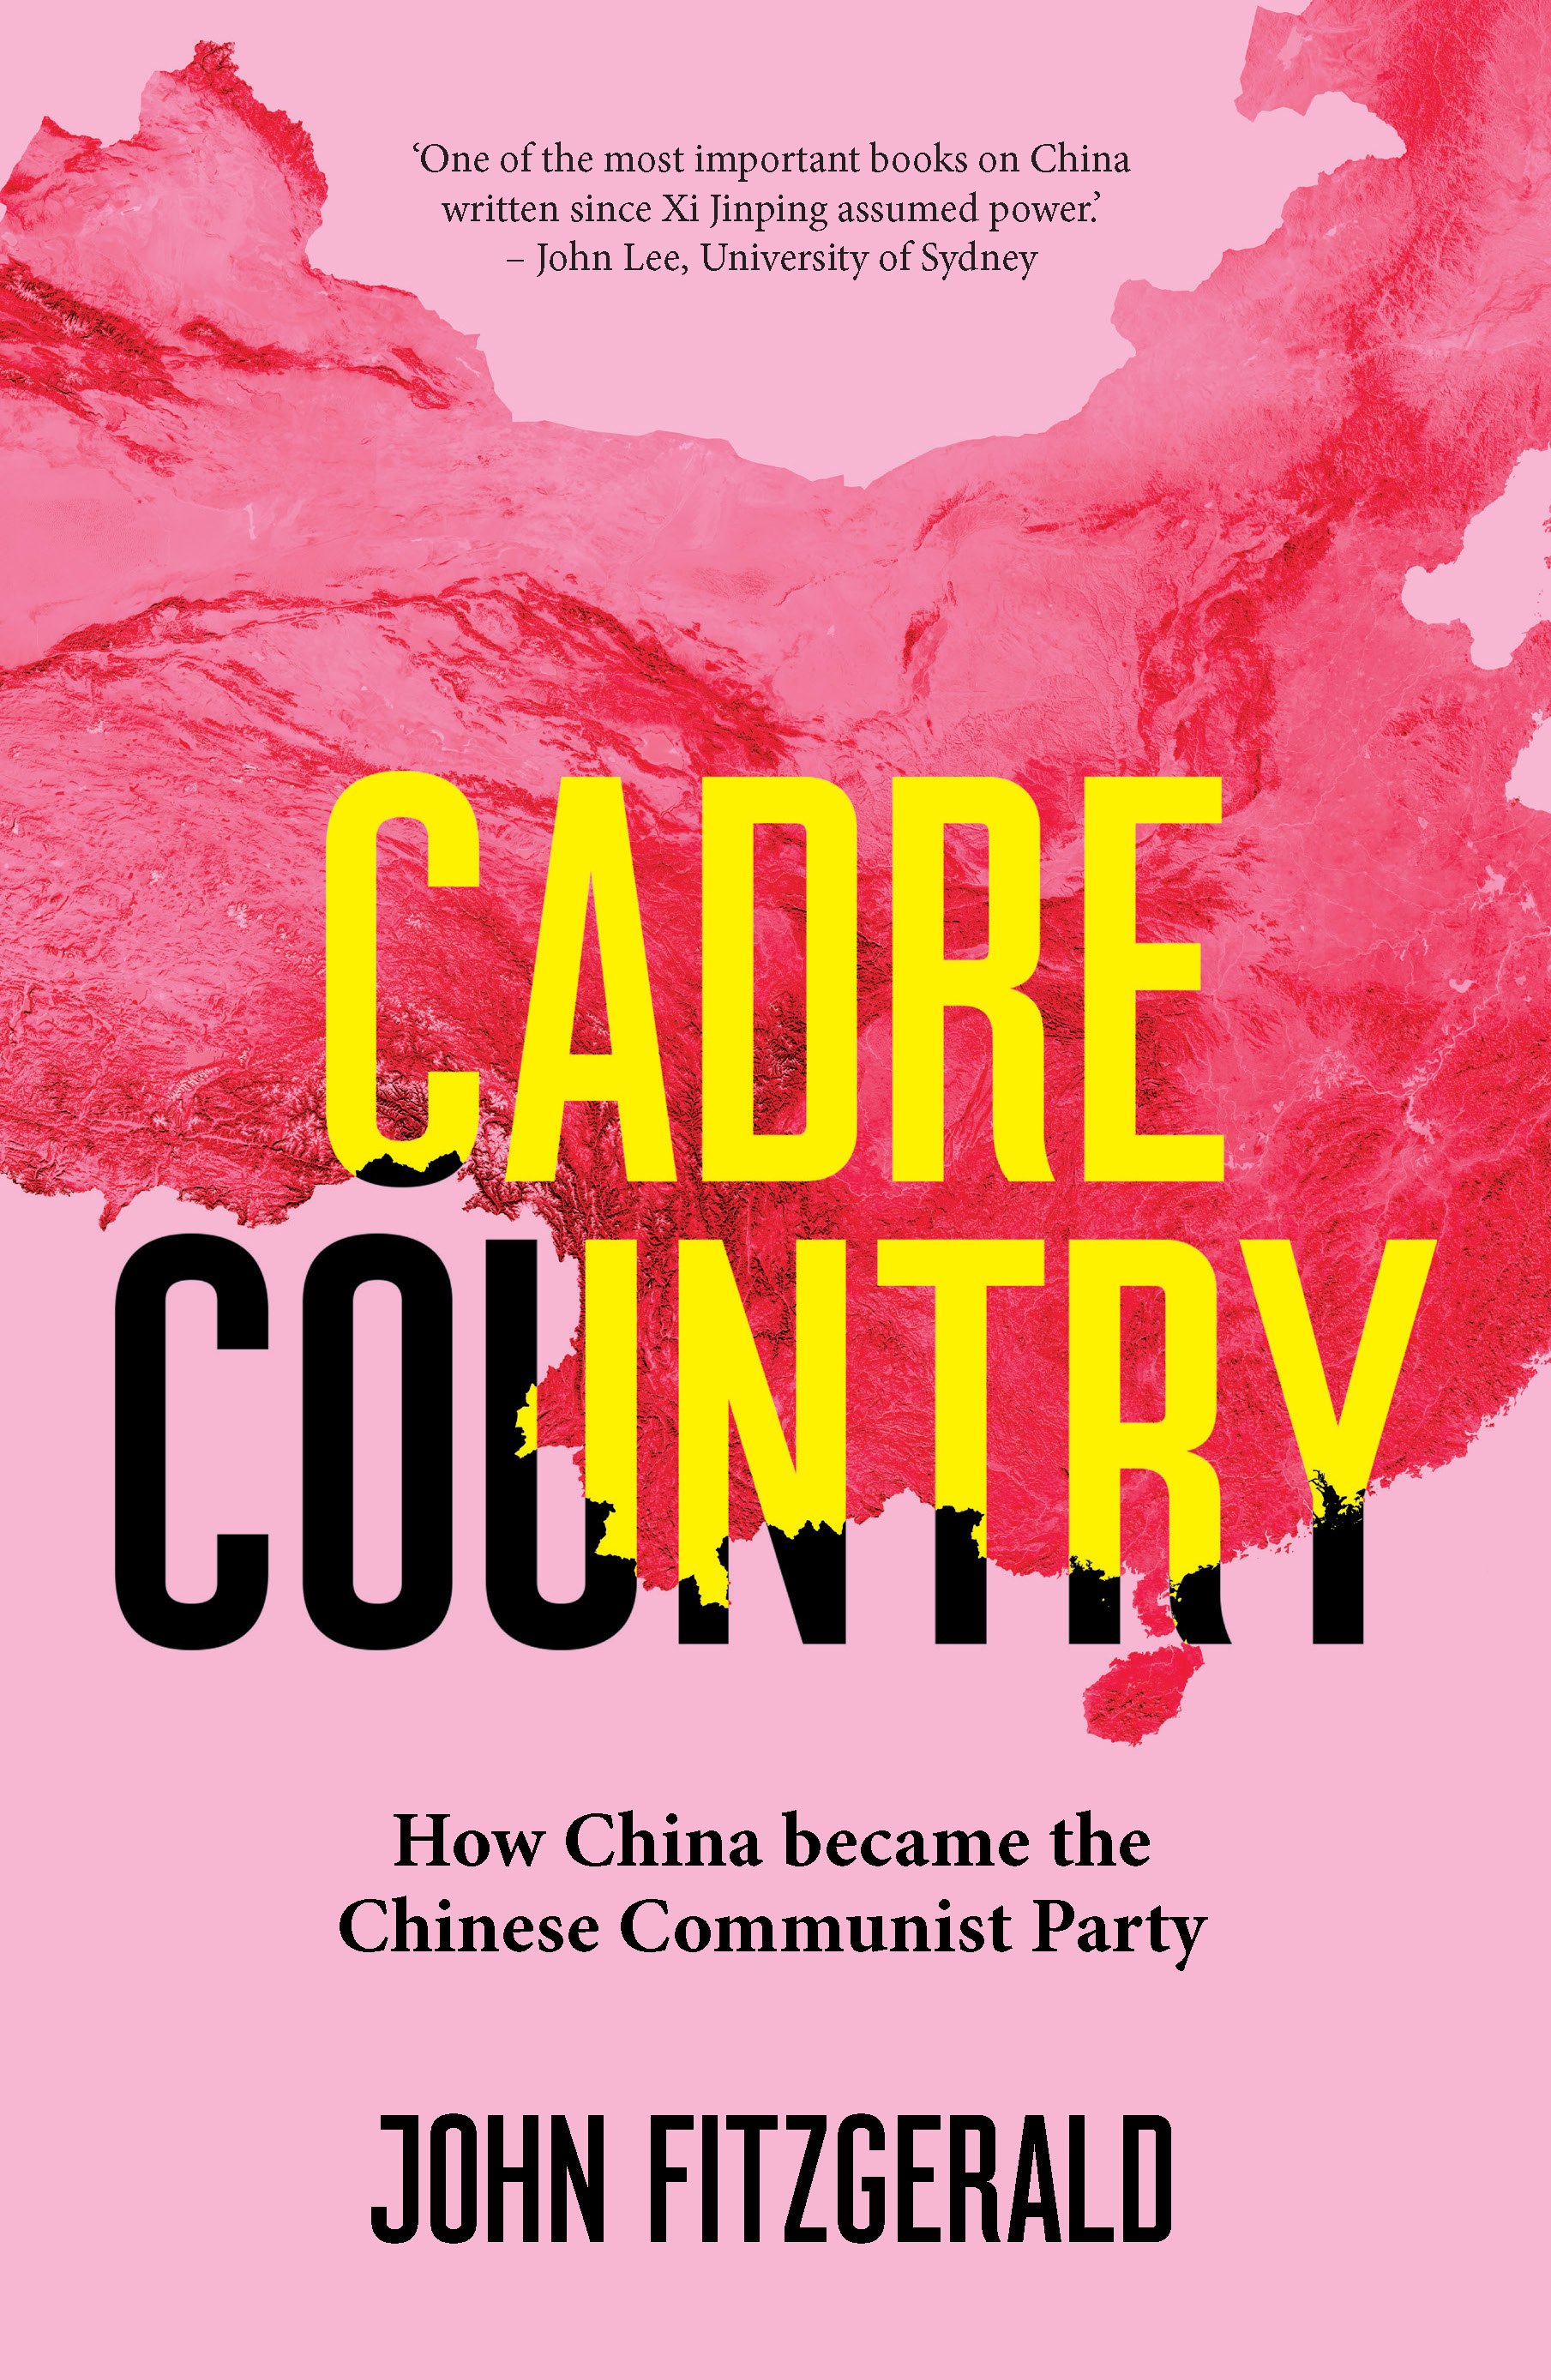 Cadre Country by John Fitzgerald